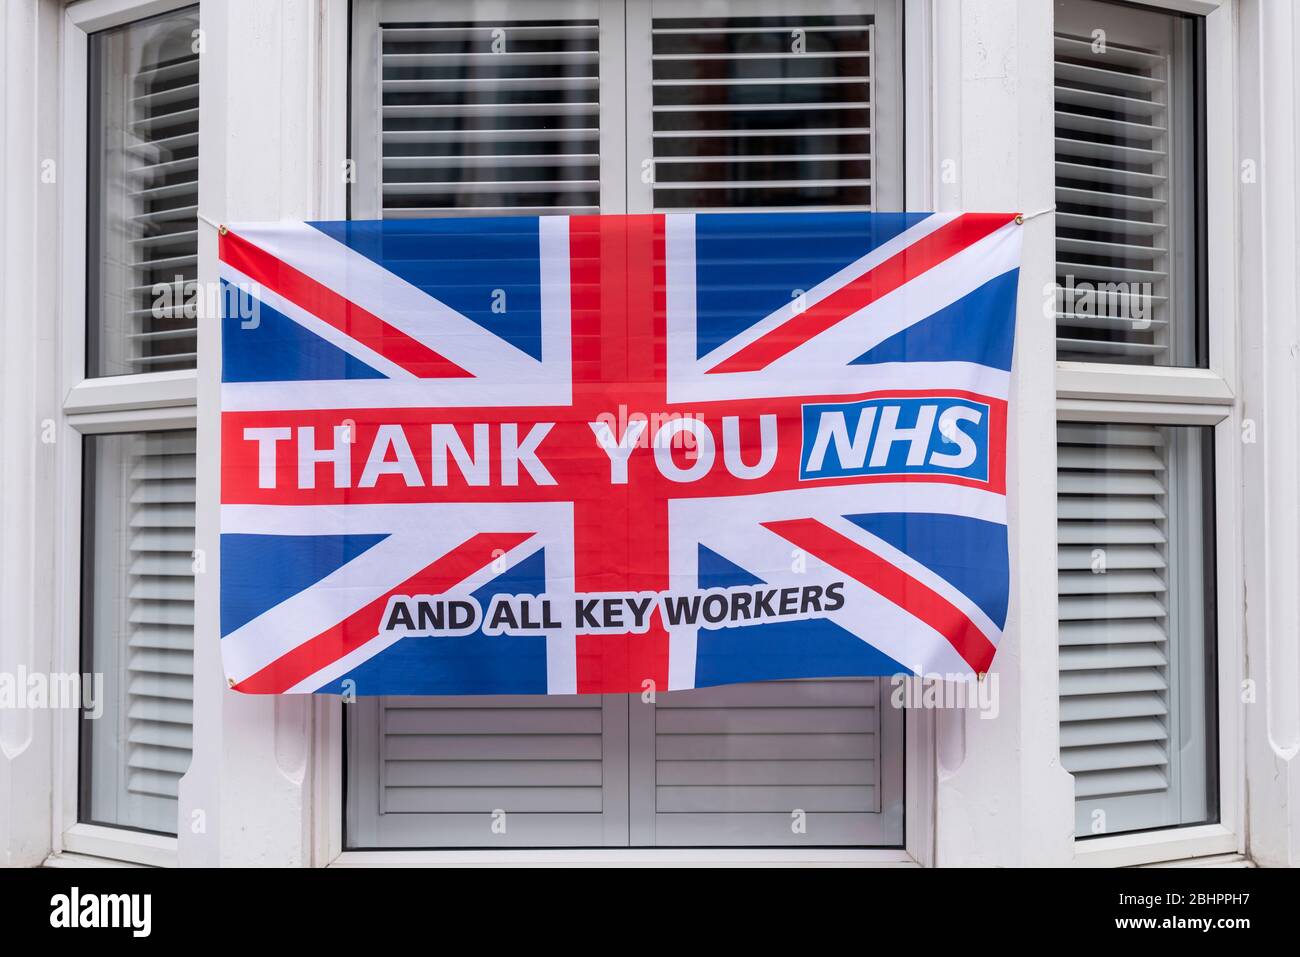 British Union Jack flag with thank you NHS and key workers message during the COVID-19 Coronavirus pandemic outbreak period Southend on Sea, Essex, UK Stock Photo